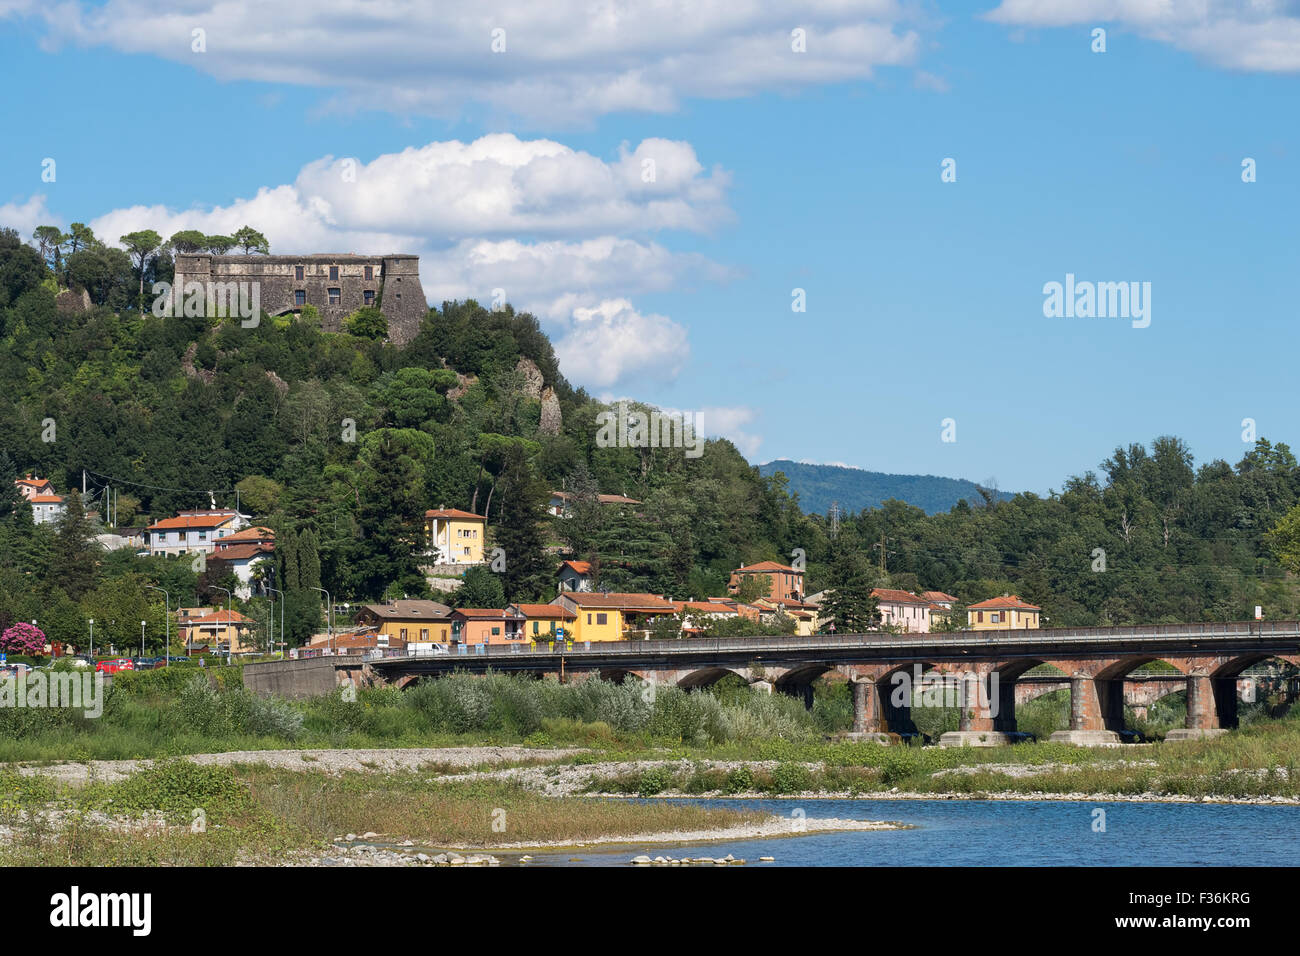 Aulla town in the Lunigiana area of north Tuscany, Italy. River Magra in the foreground and Brunella fortress on the hill. Stock Photo